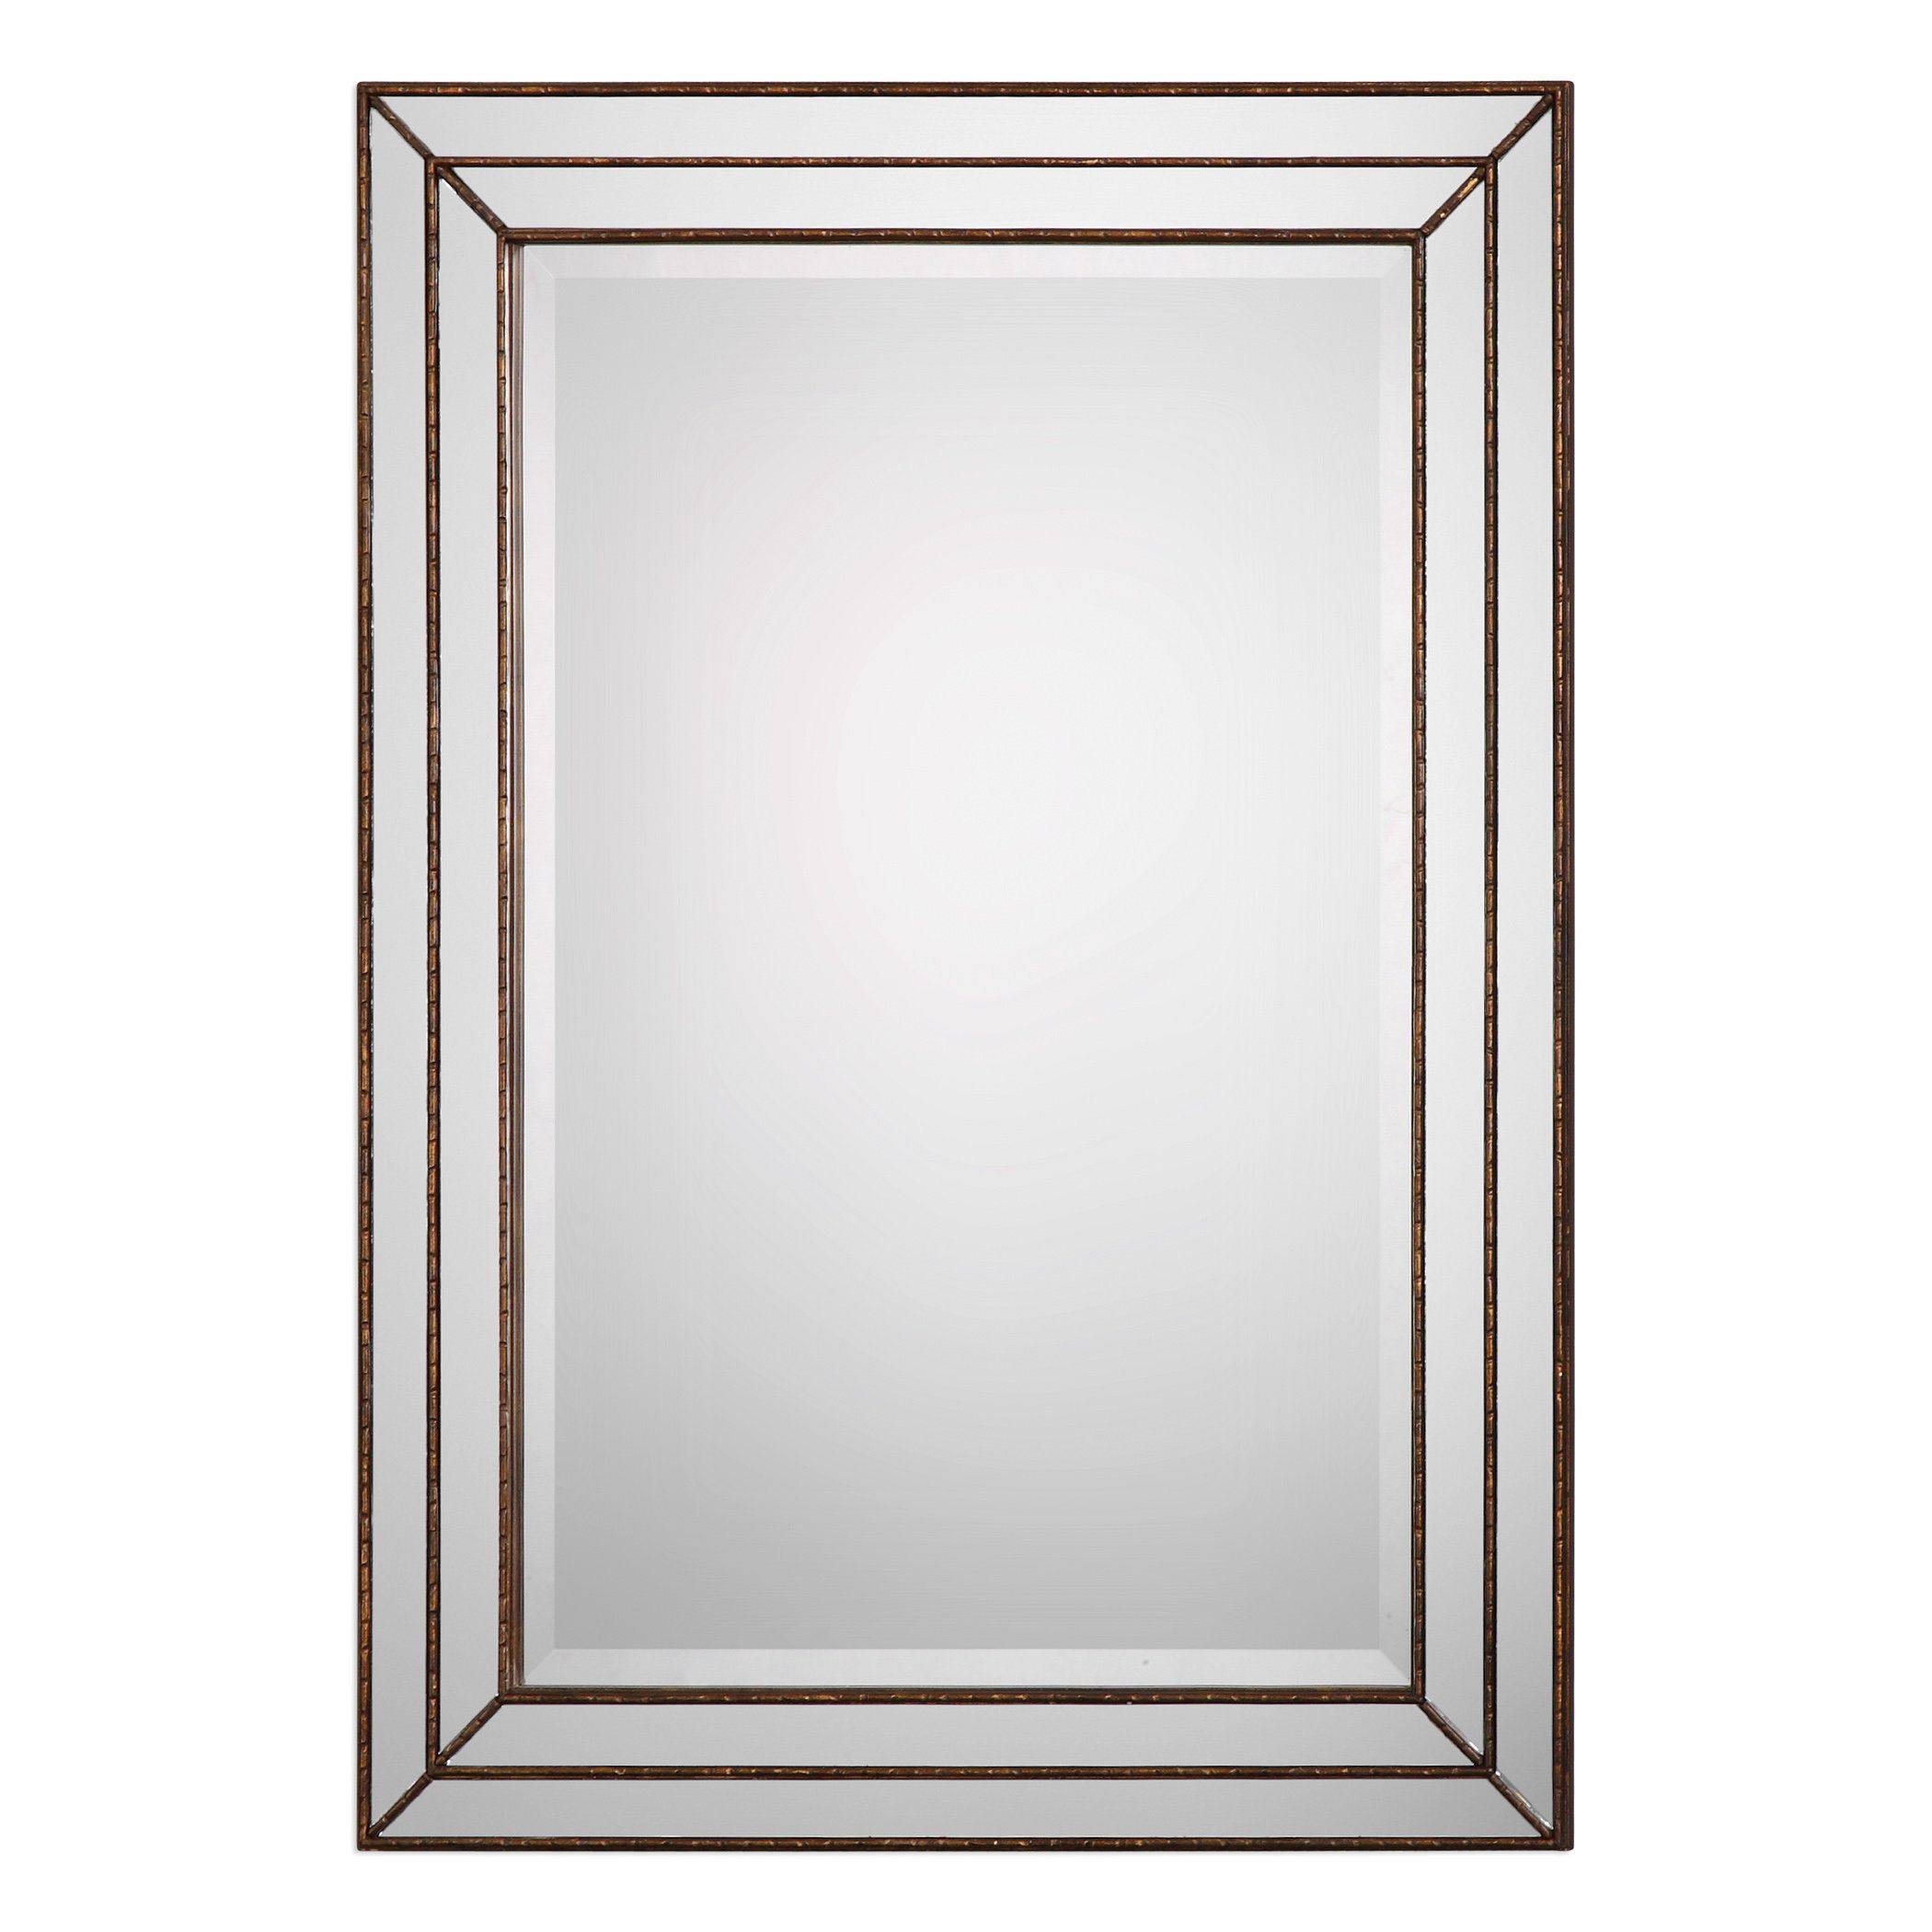 Greyleigh Willacoochee Traditional Beveled Accent Mirror With Regard To Vassallo Beaded Bronze Beveled Wall Mirrors (View 14 of 20)